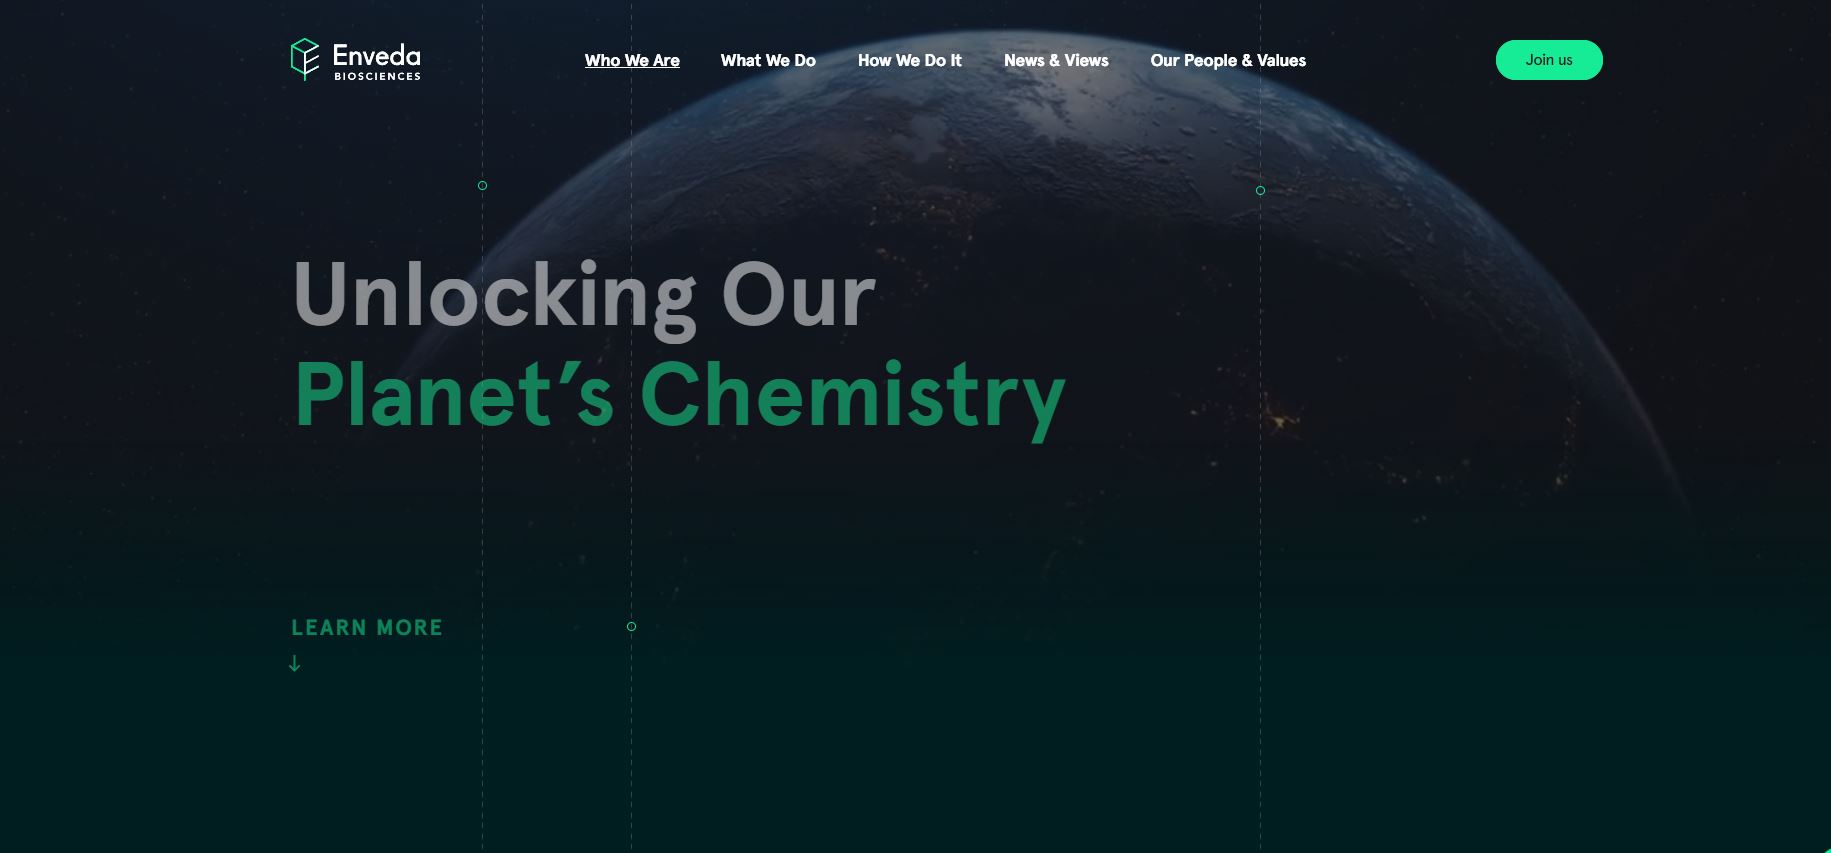 With $51 million raised in its Series B funding, Enveda Biosciences is transforming nature into new medicines by unlocking our planet’s chemistry